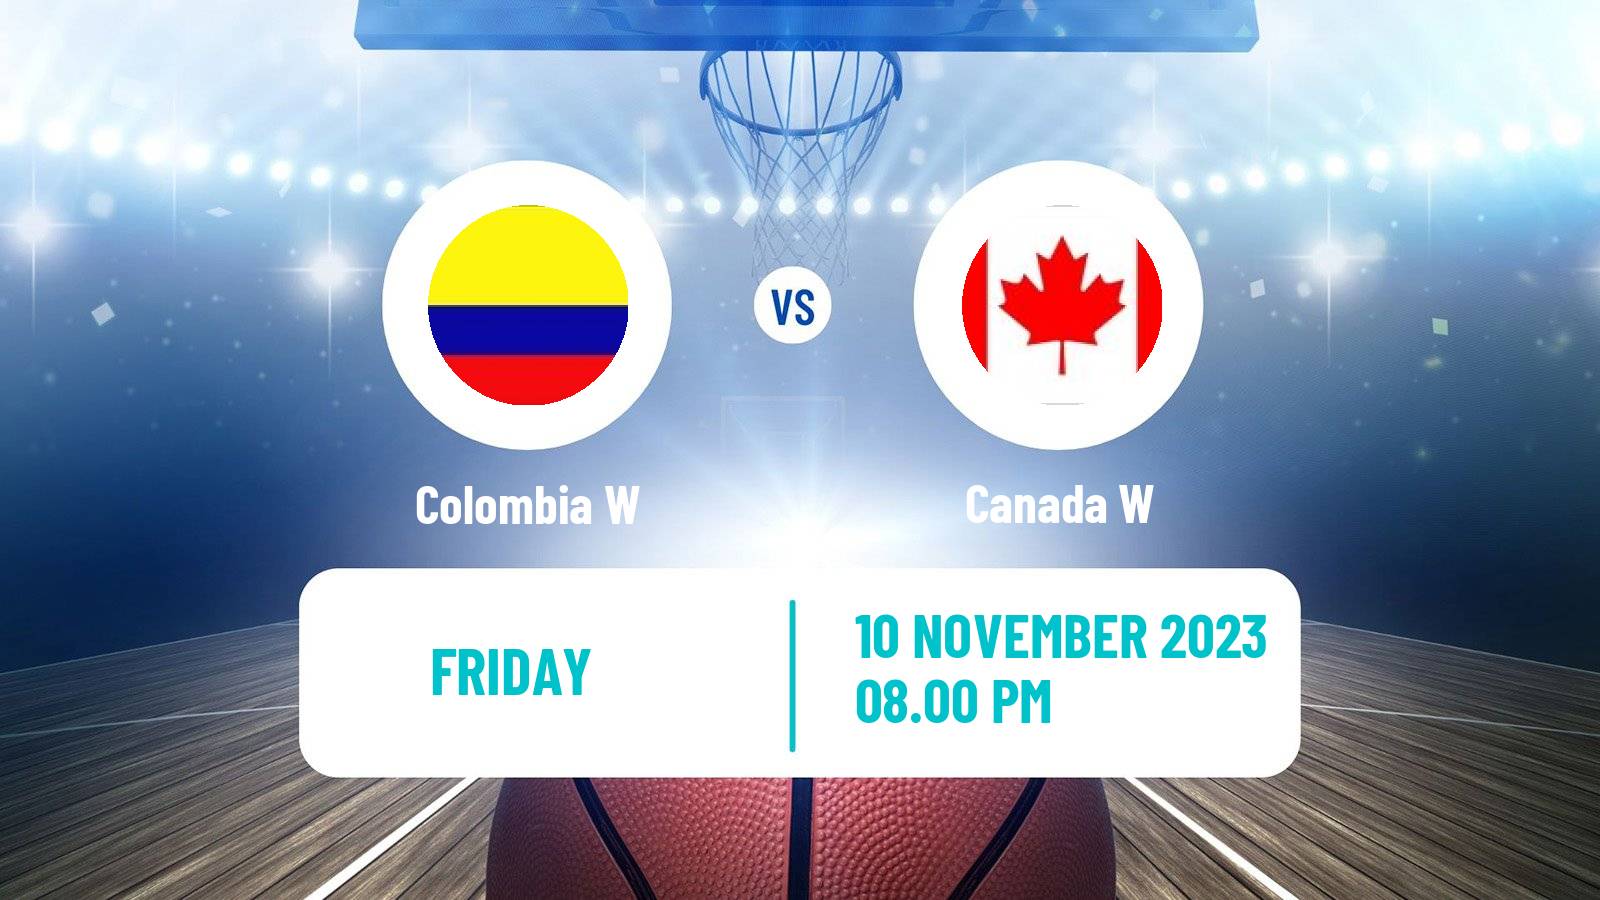 Basketball Olympic Games - Basketball Women Colombia W - Canada W